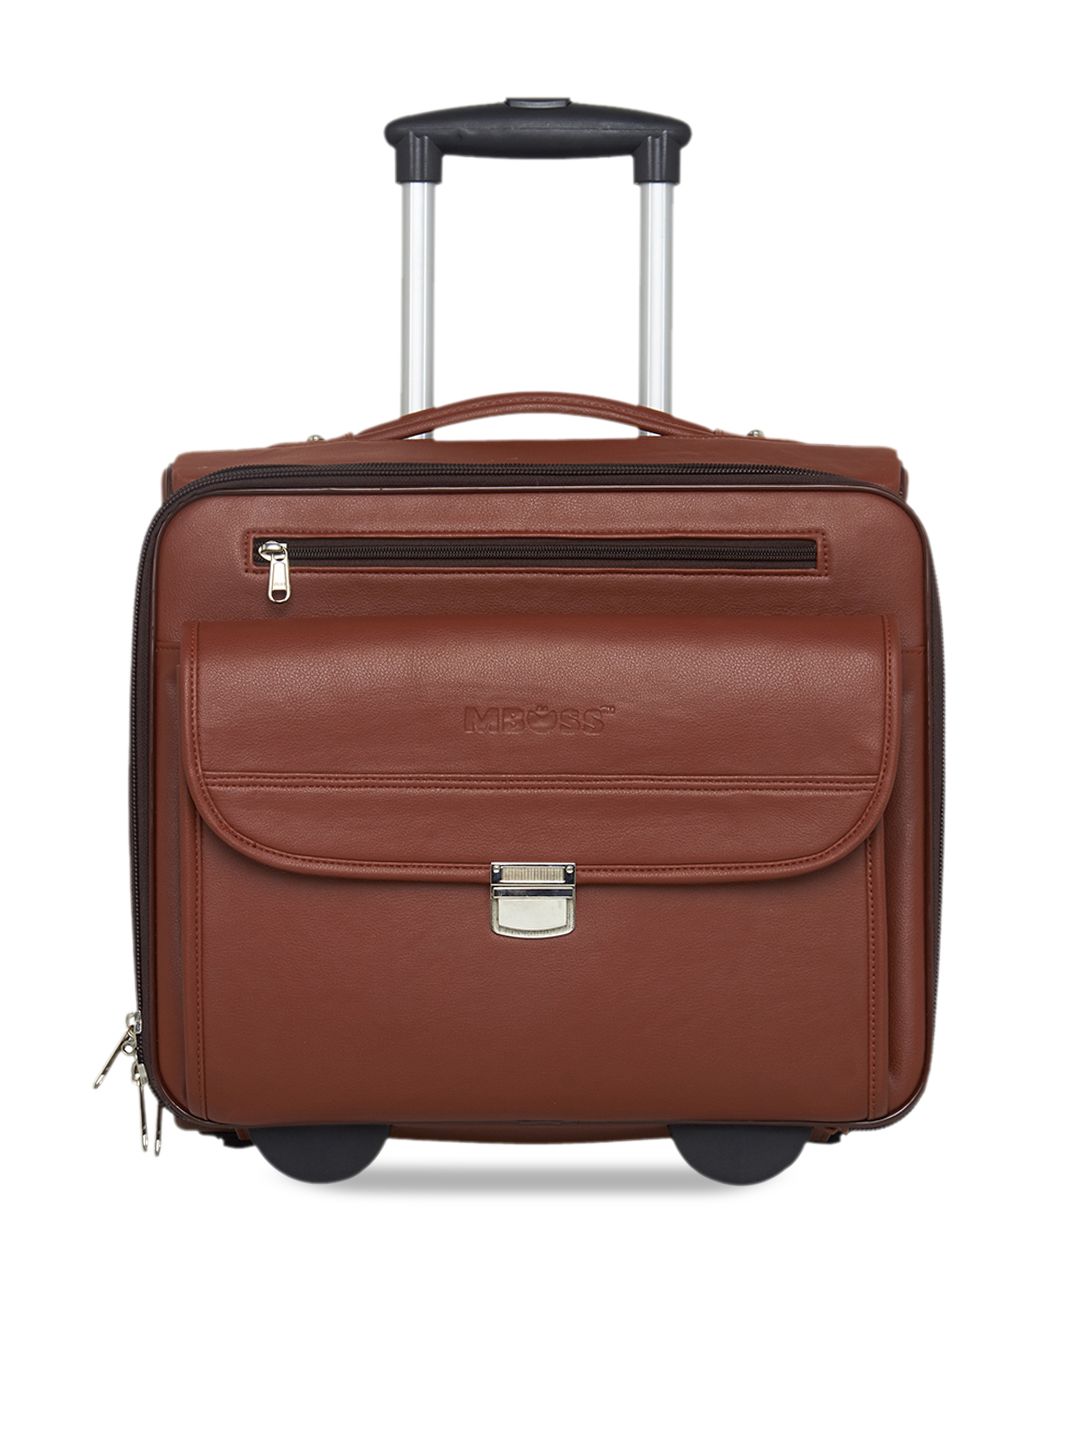 MBOSS Tan Brown Cabin Trolley Bag with Laptop Compartment Price in India